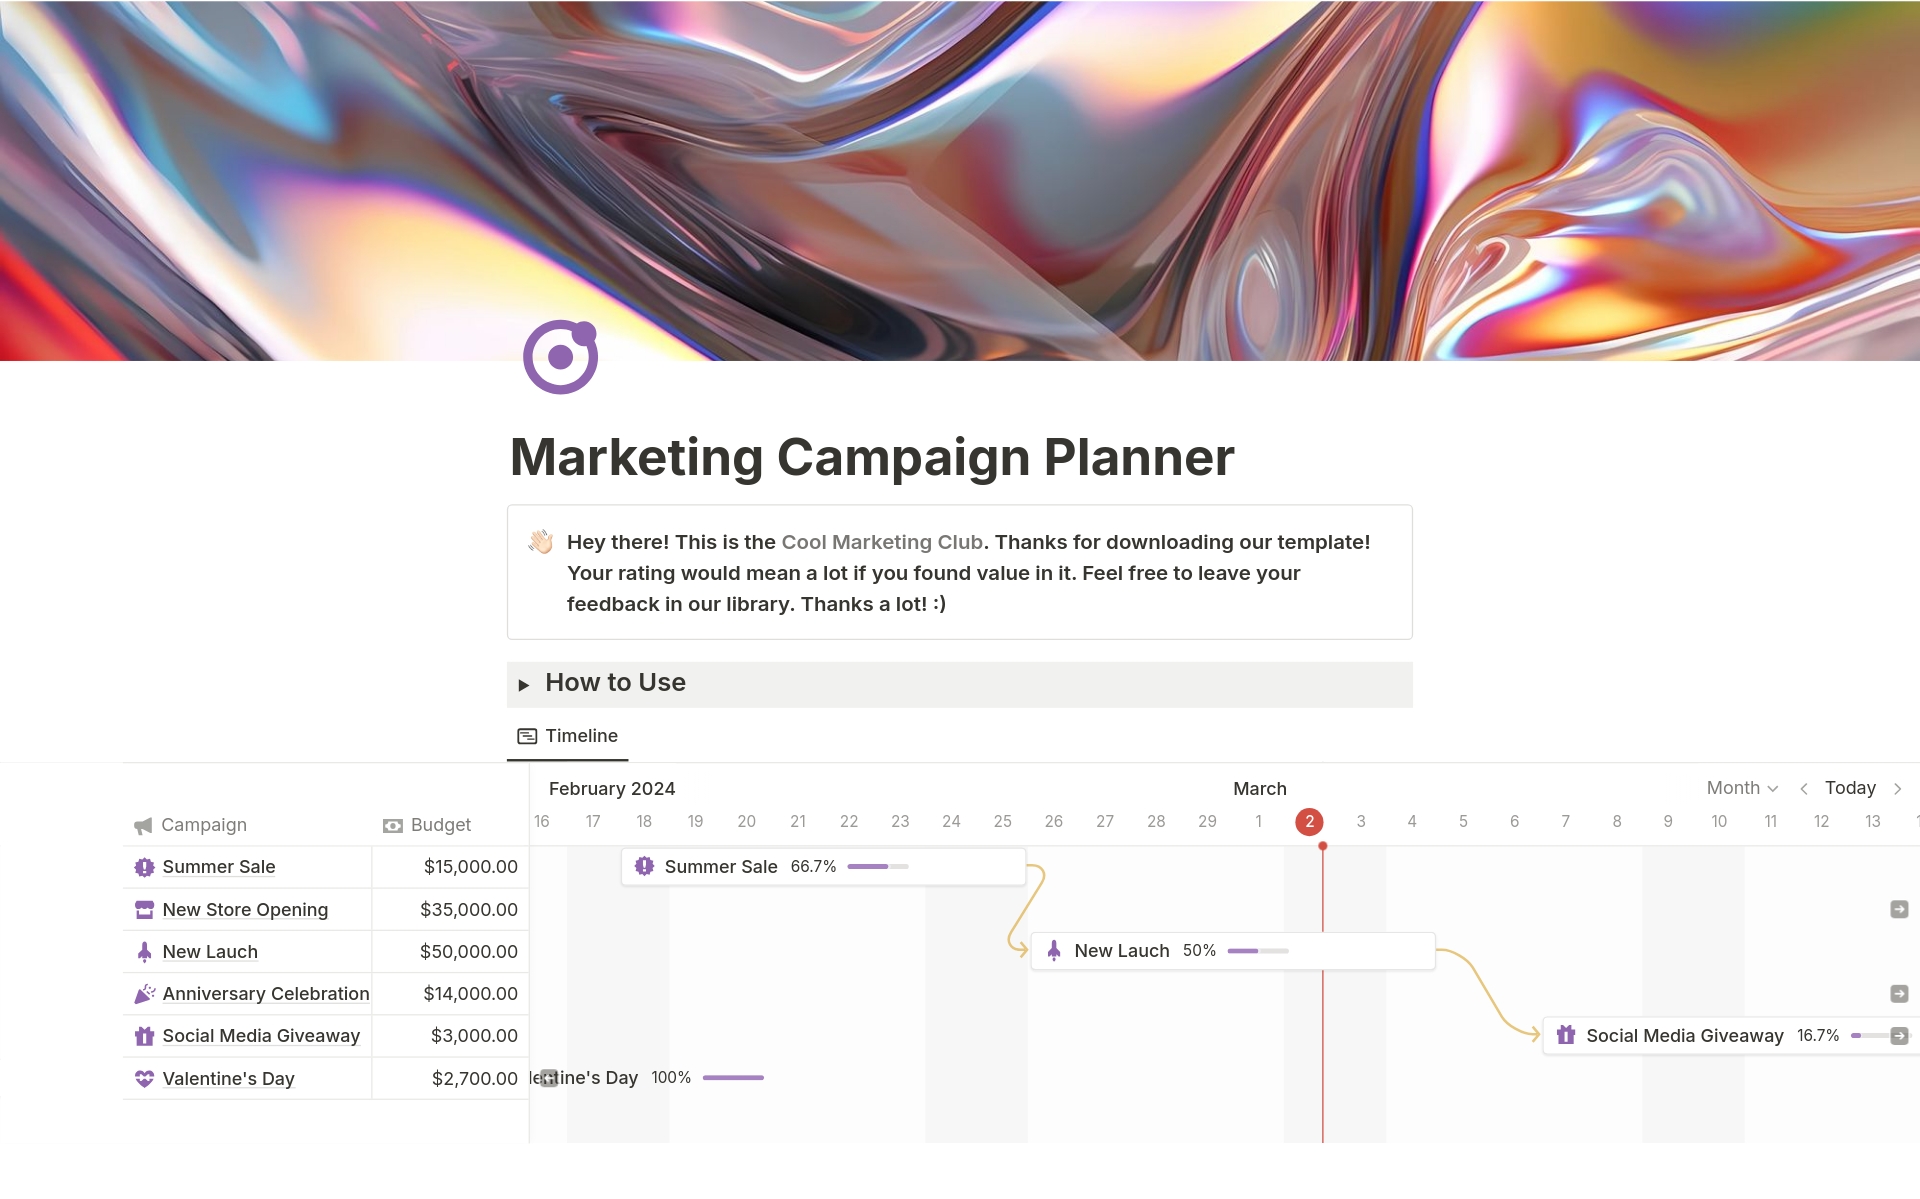 The Marketing Campaign Planner template is designed to assist you in planning your marketing campaigns effectively. It helps you define the campaign, allocate budget, outline associated tasks, and manage the timeline, among other things.